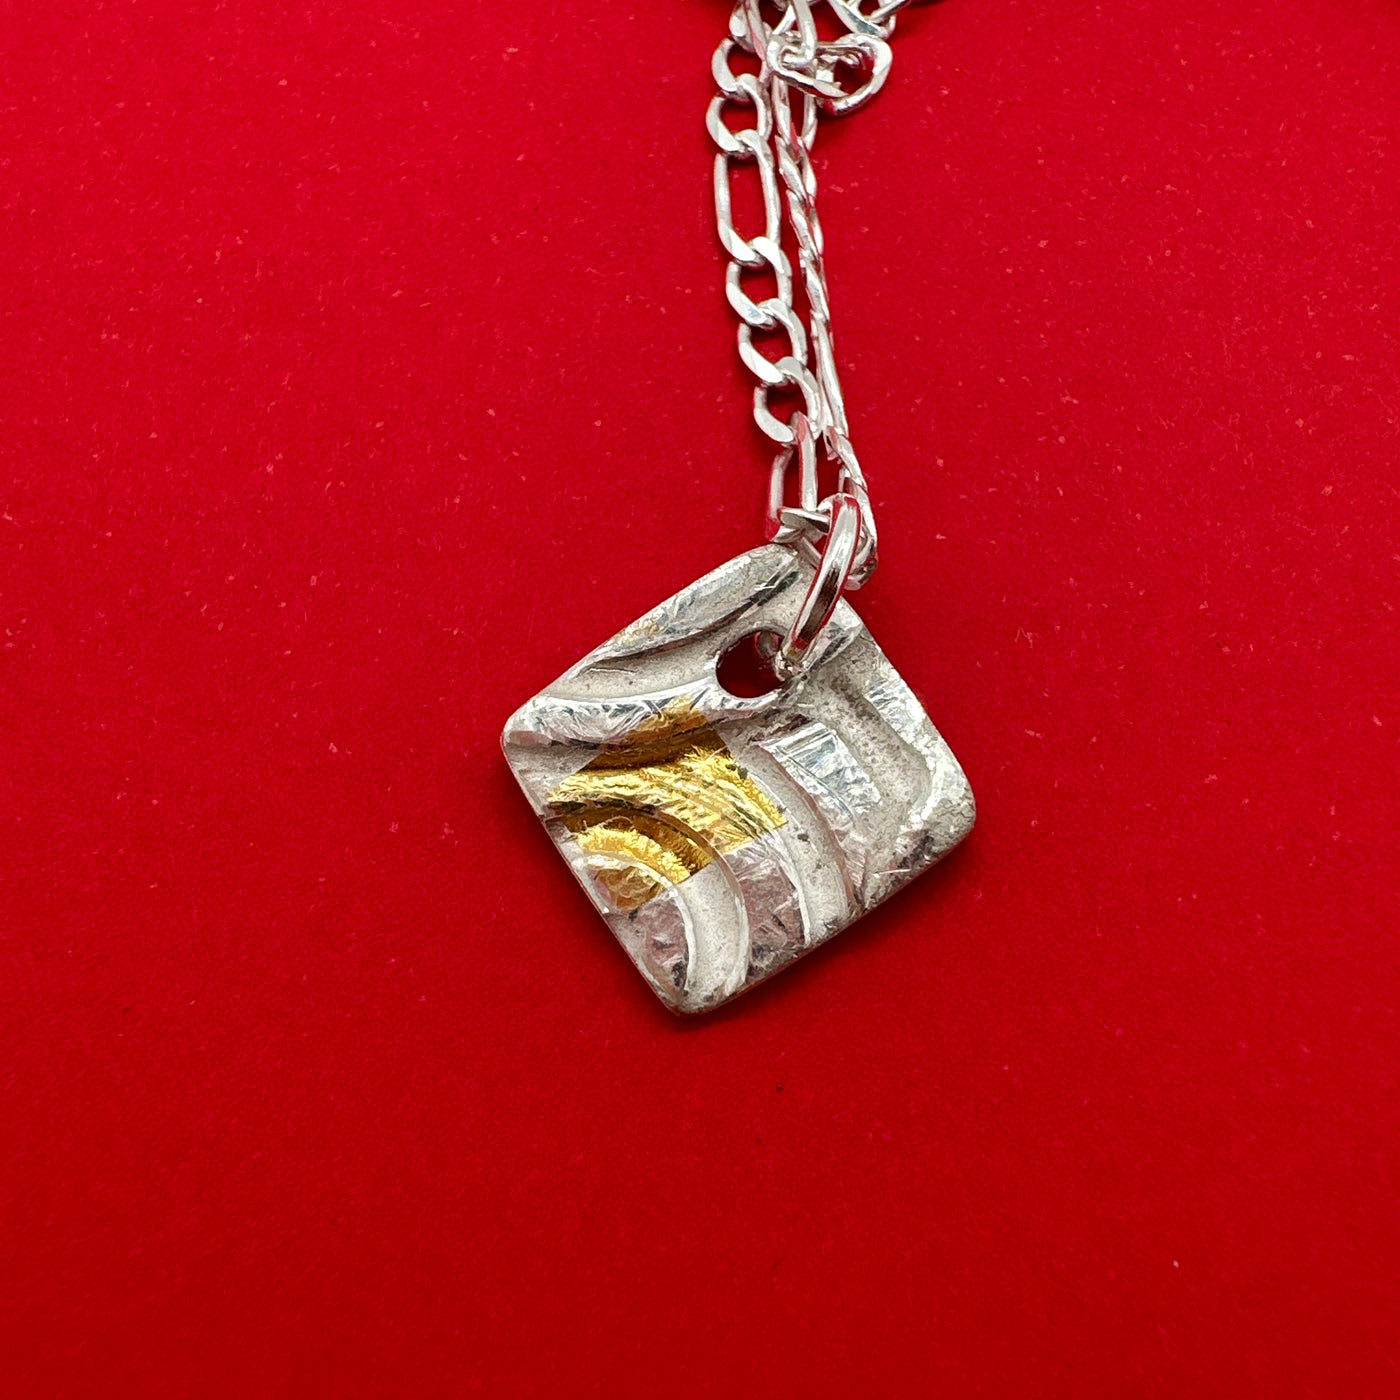 Square 1 cm fine silver teal and gold leaf-Keumboo